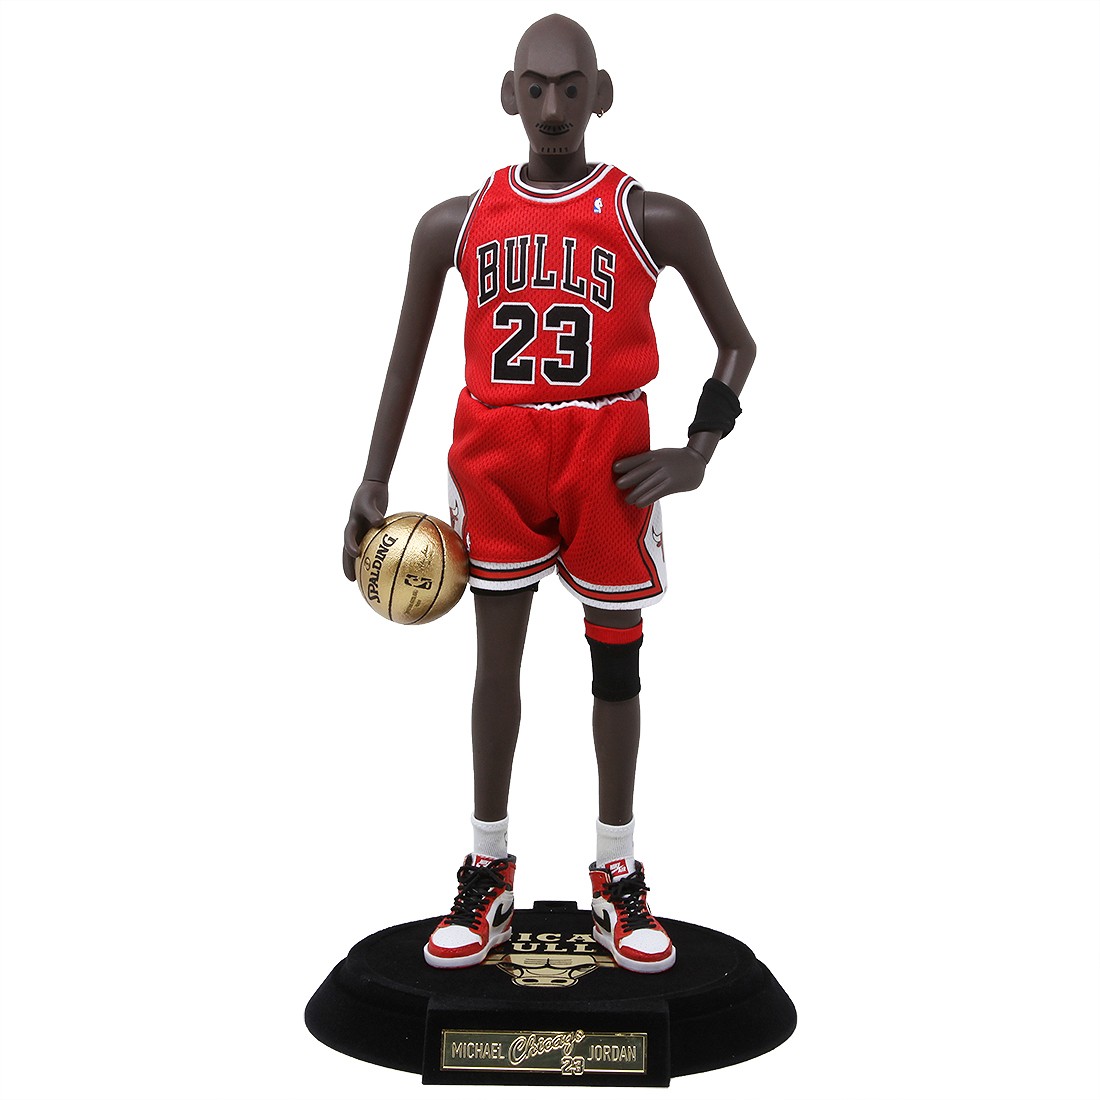 Enterbay x Eric Michael Jordan 1/6 Scale Figure - Limited Edition red